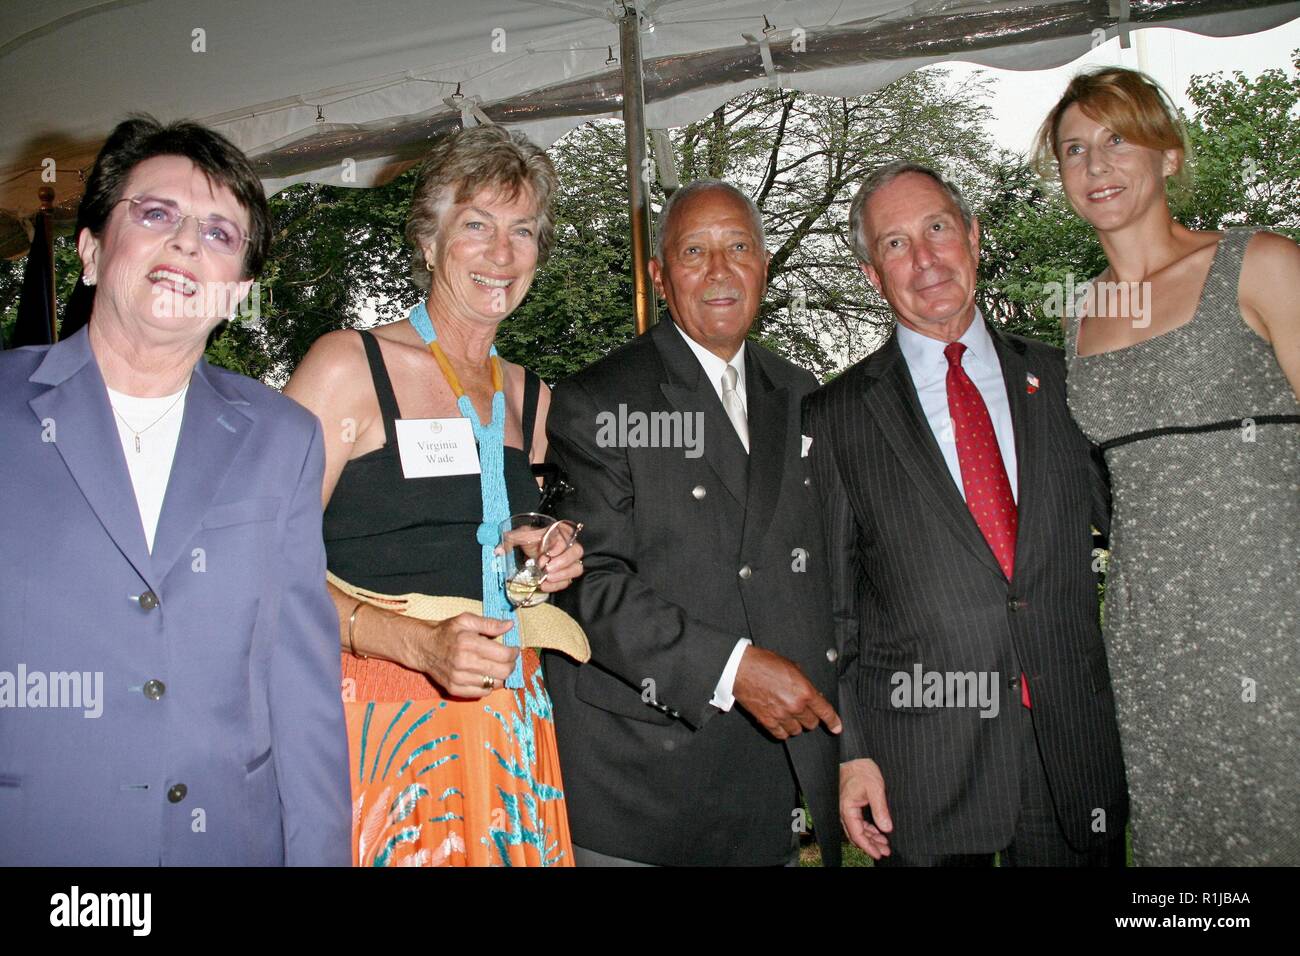 New York, NY - July 16:  Billie Jean King, Virginia Wade, Mayor David Dinkins, Mayor Michael R. Bloomberg, Monica Seles at David Dinkins 80th Birthday Party at Gracie Mansion on Monday, July 16, 2007 in New York, NY.  (Photo by Steve Mack/S.D. Mack Pictures) Stock Photo